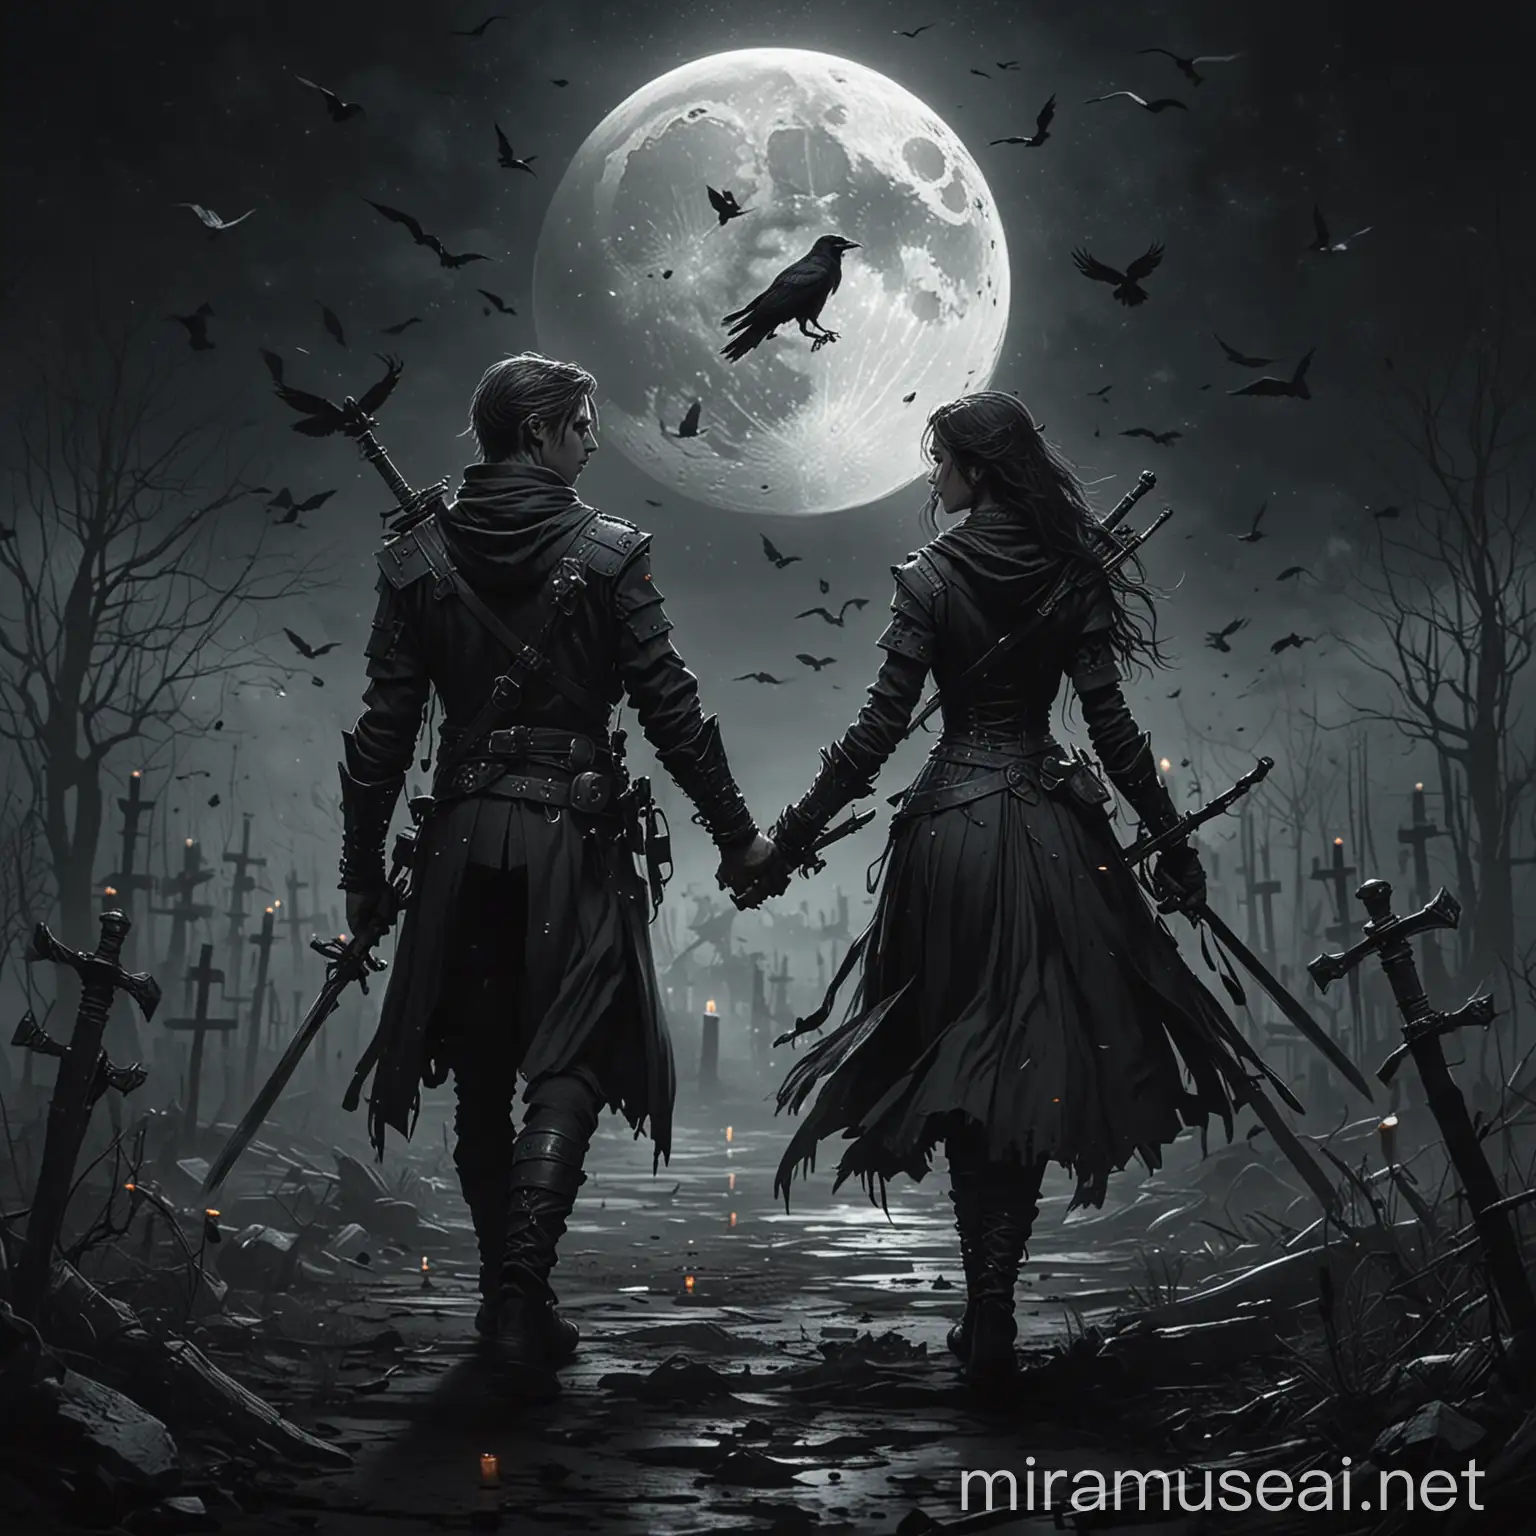 Romantic Couple Holding Hands Amidst Dark Aesthetic Scenery with Moonlight and Weapons